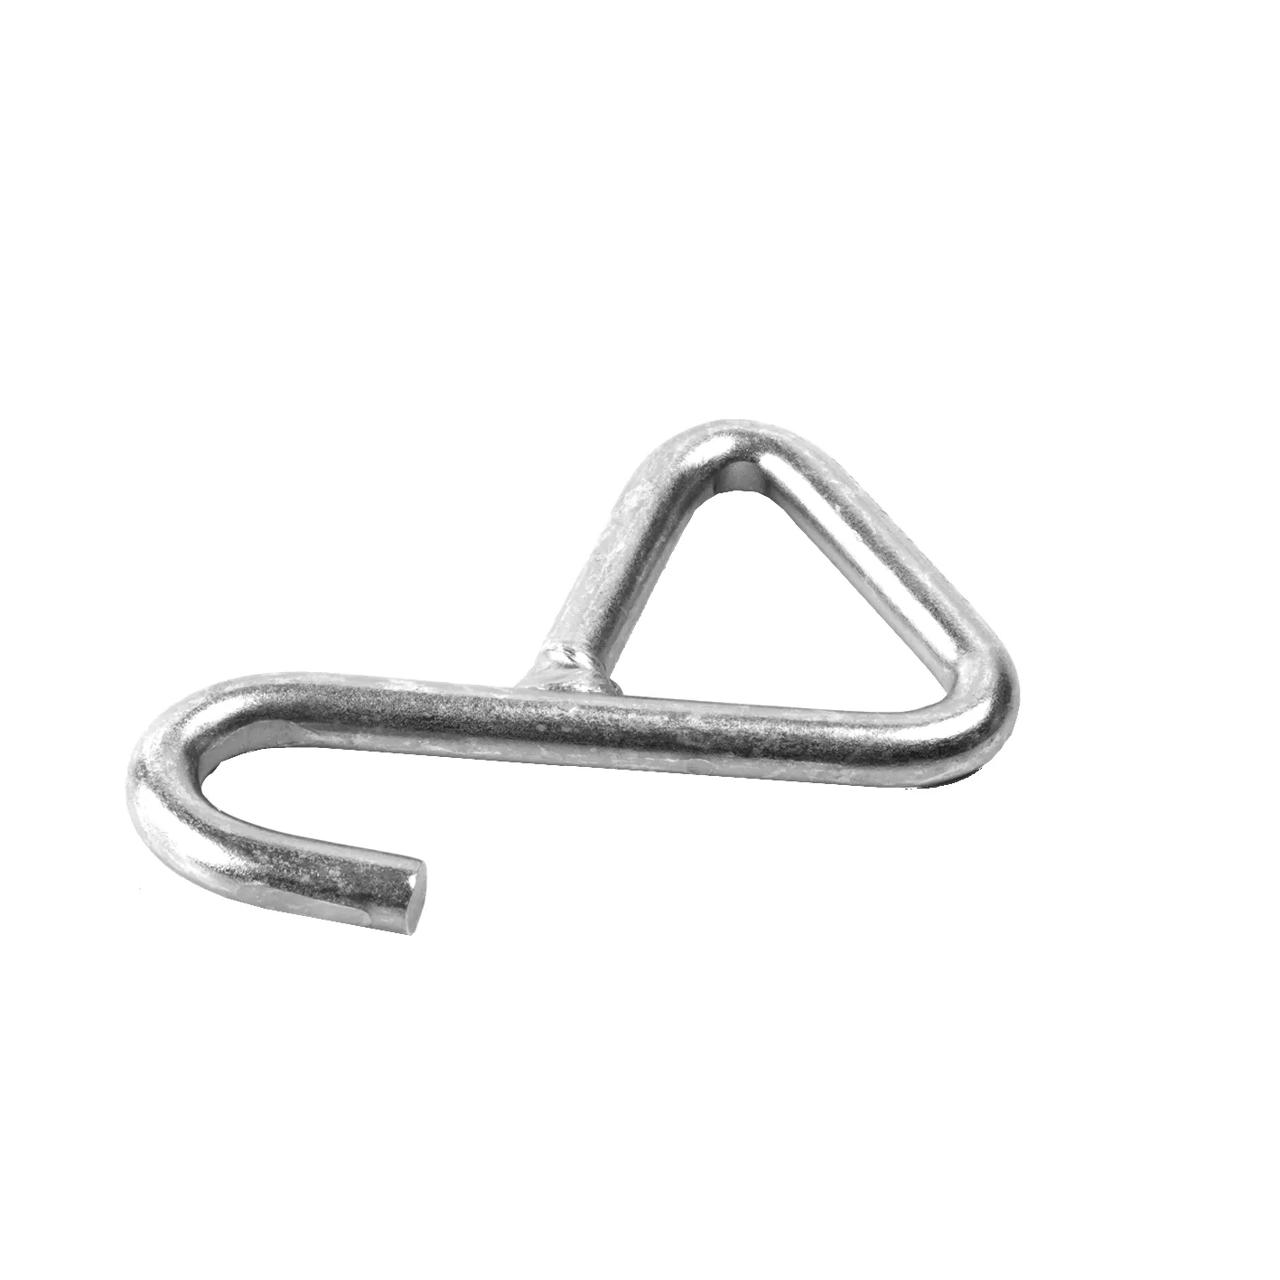 Flat hook, 50mm, for track